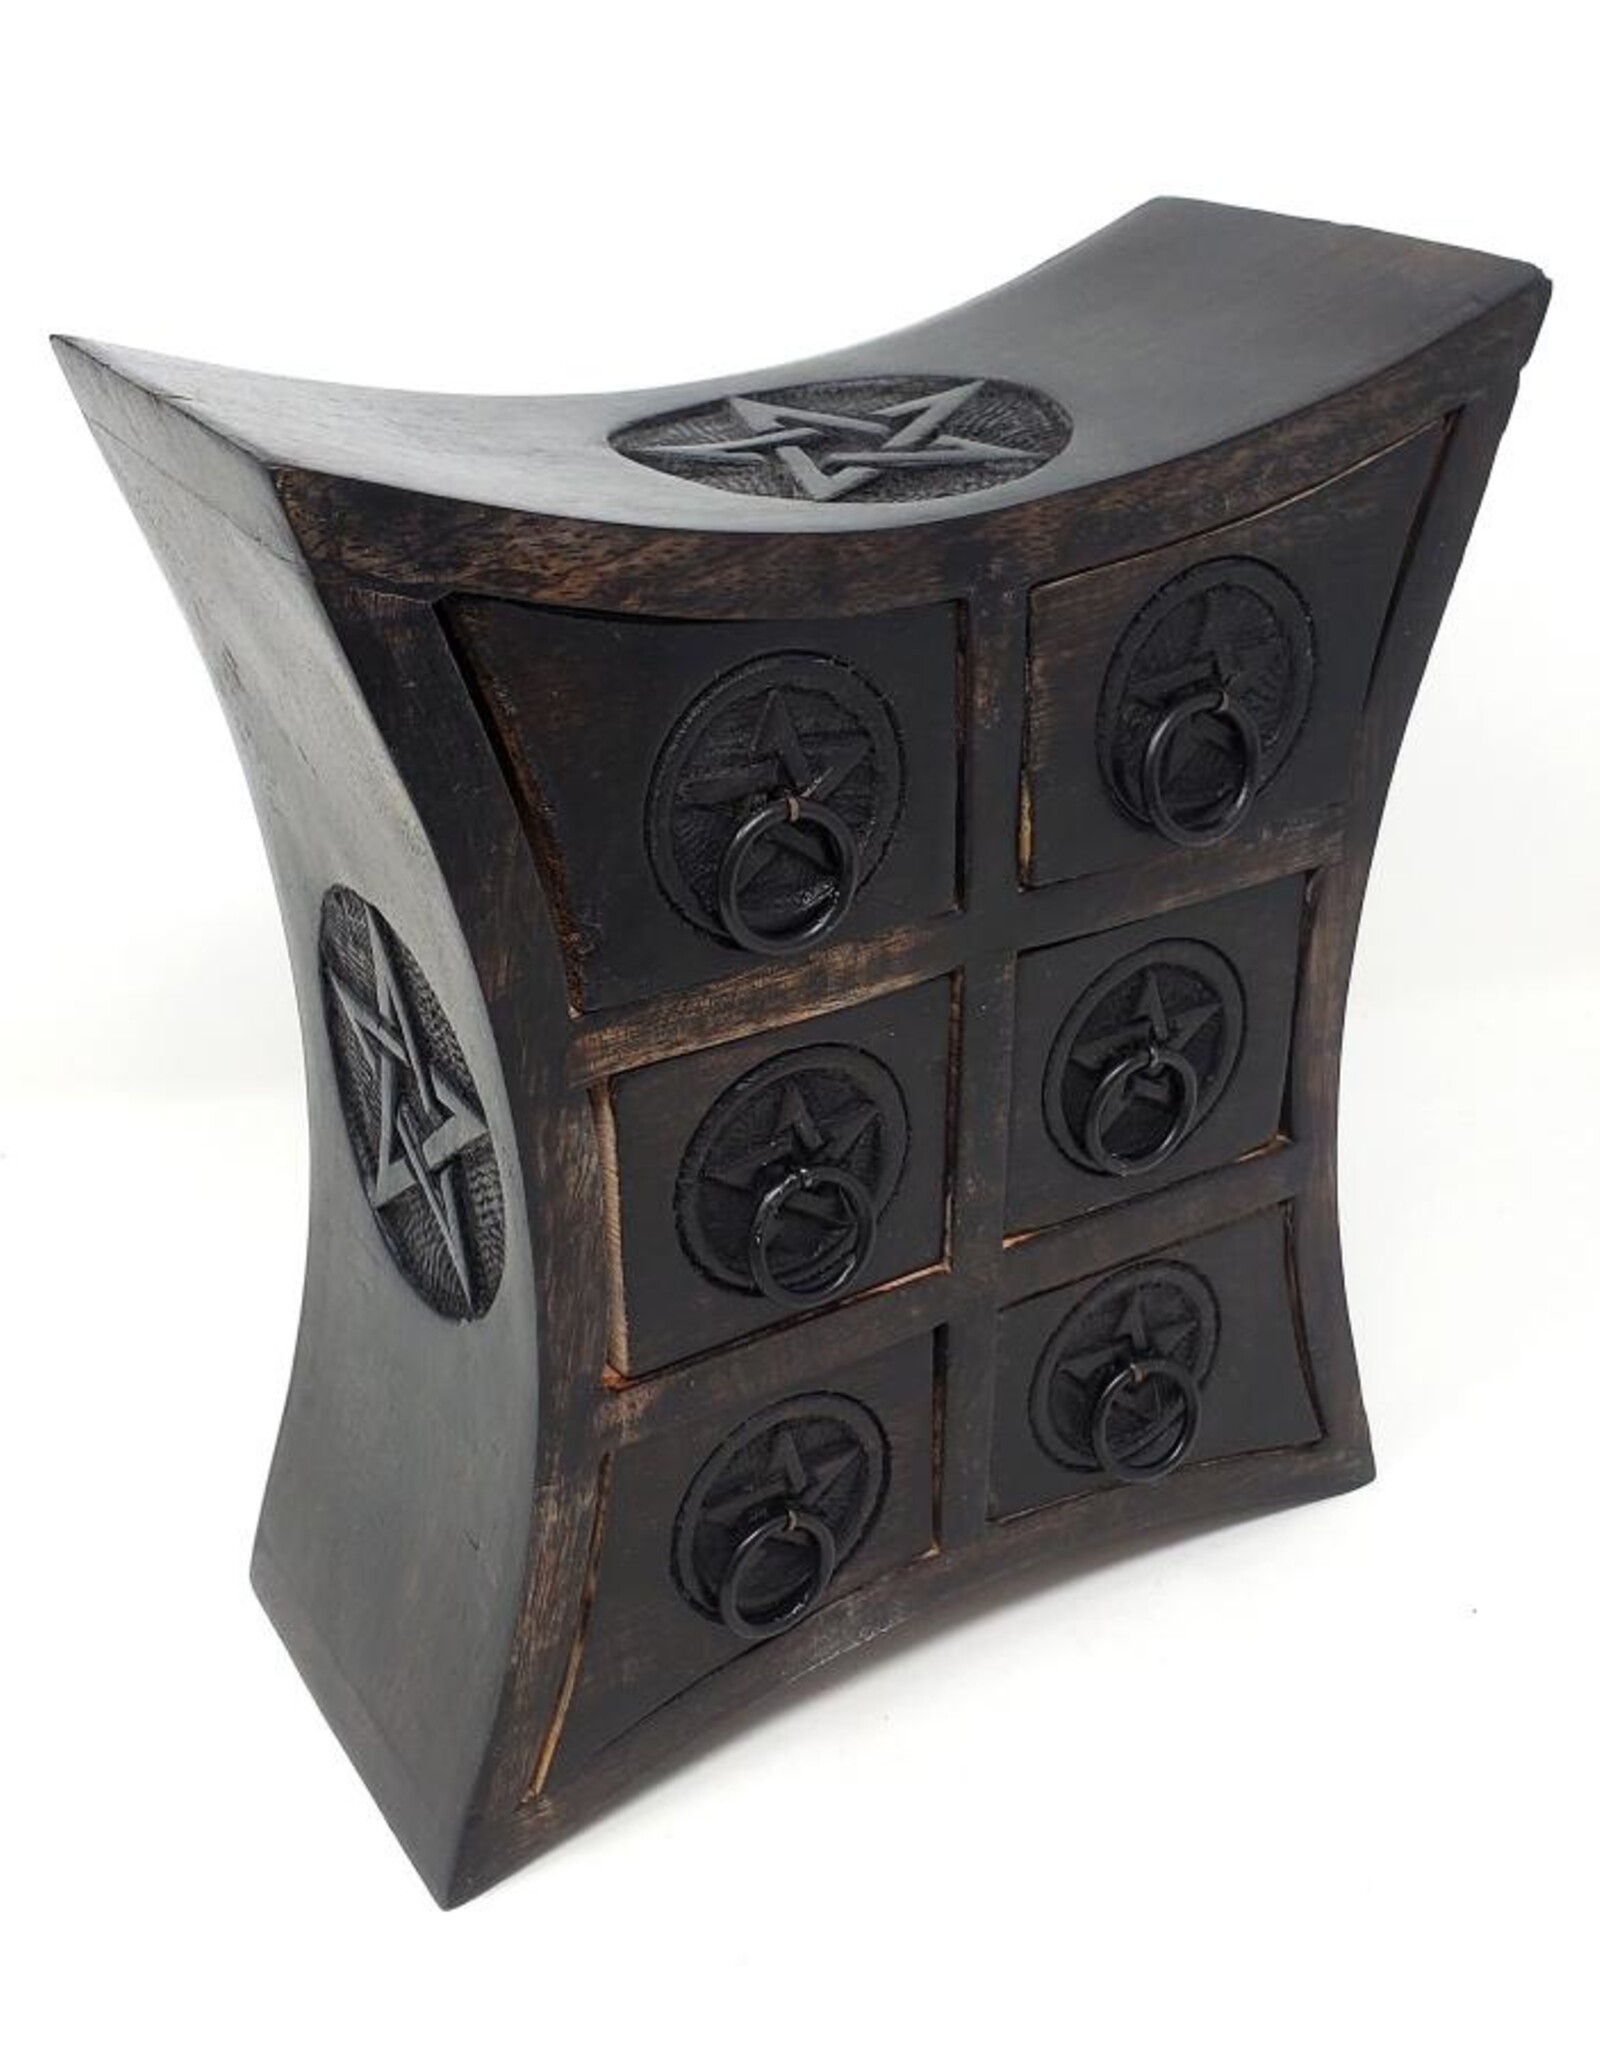 New Age Imports, Inc. Pentagram Wooden Chest with 6 Drawers: 9.5"H x 8"W x 4"D